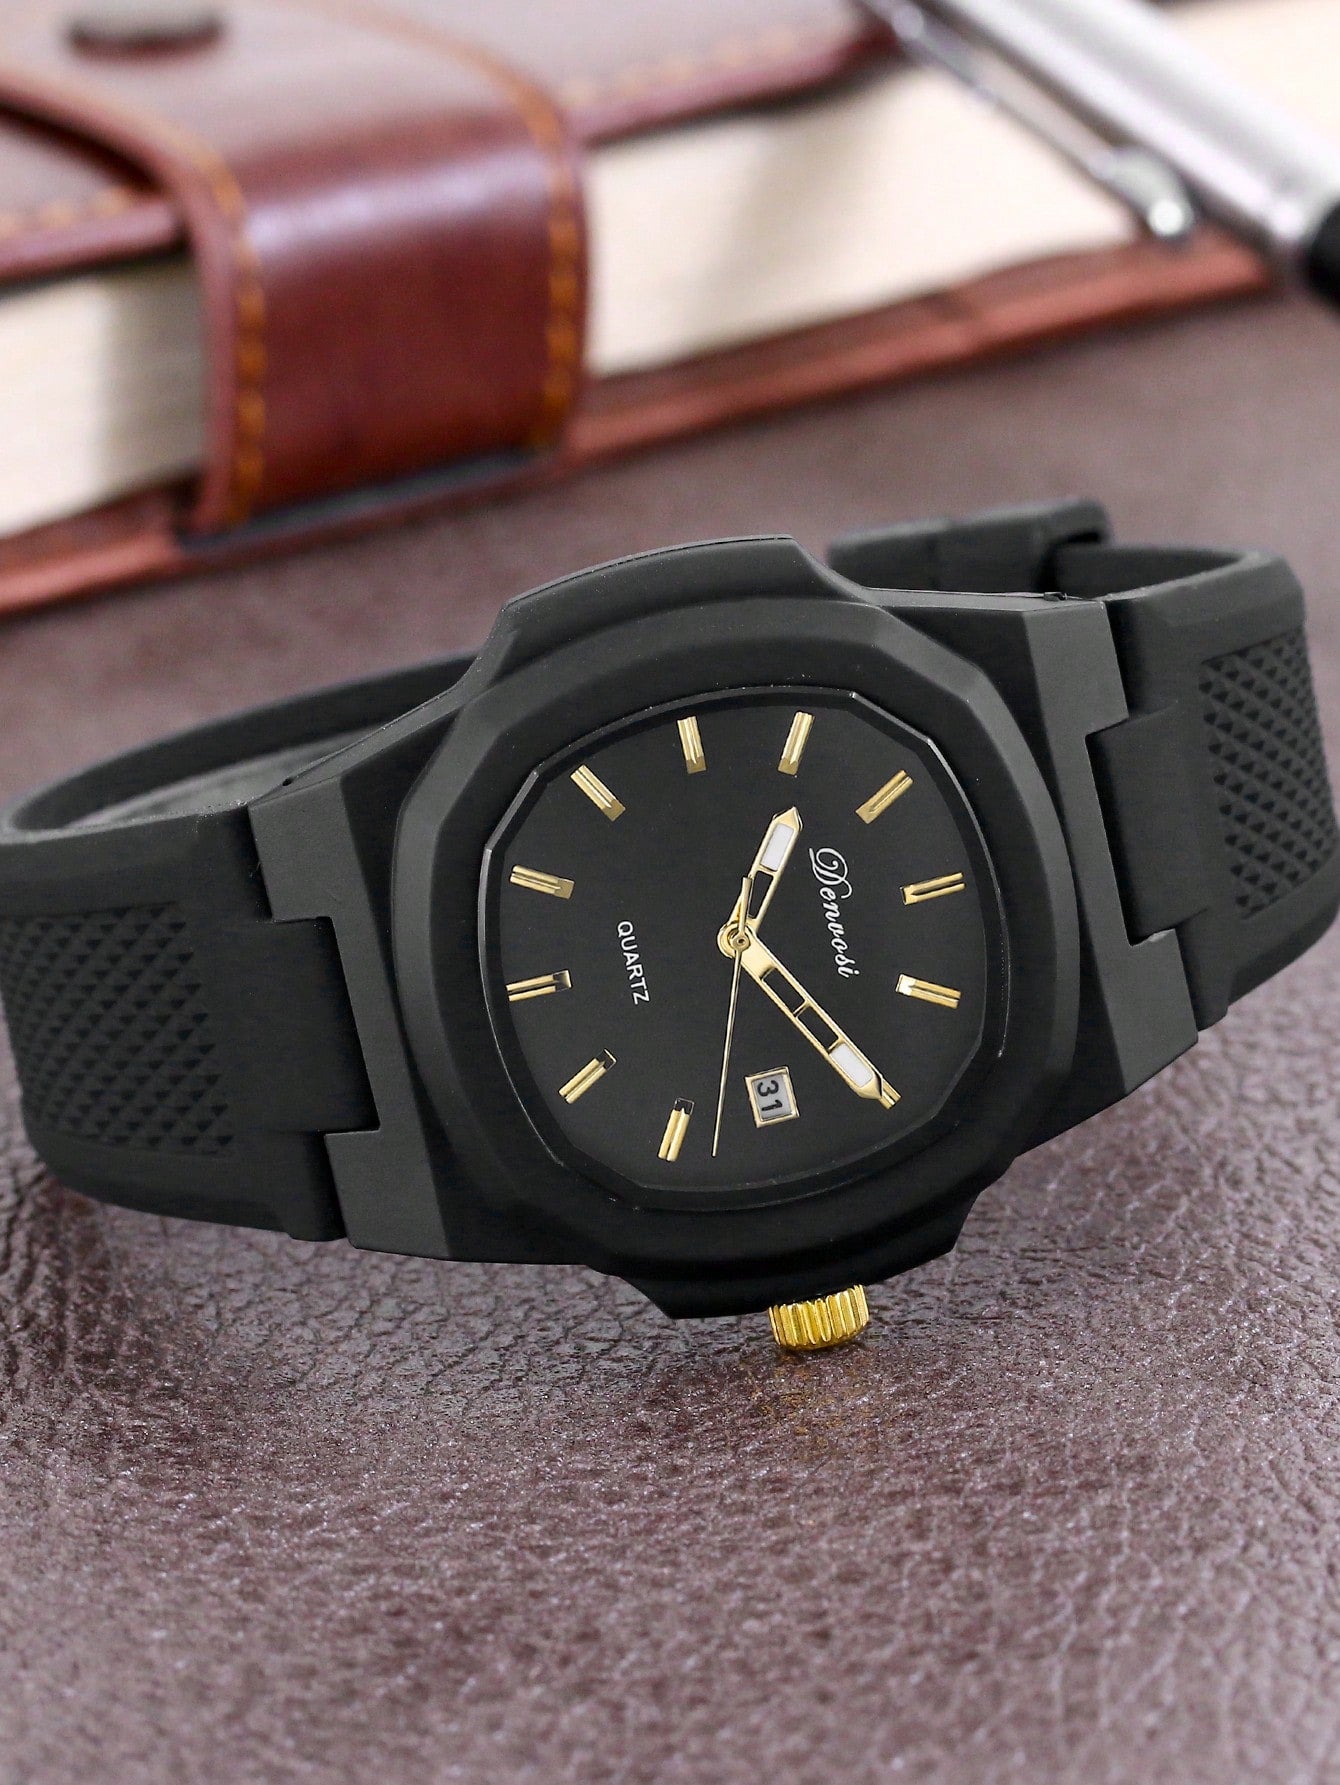 Denvosi Men's Black Fashionable Casual Silicone Strap Waterproof Date Display Watch Suitable For Daily Wearing And Parties Decoration